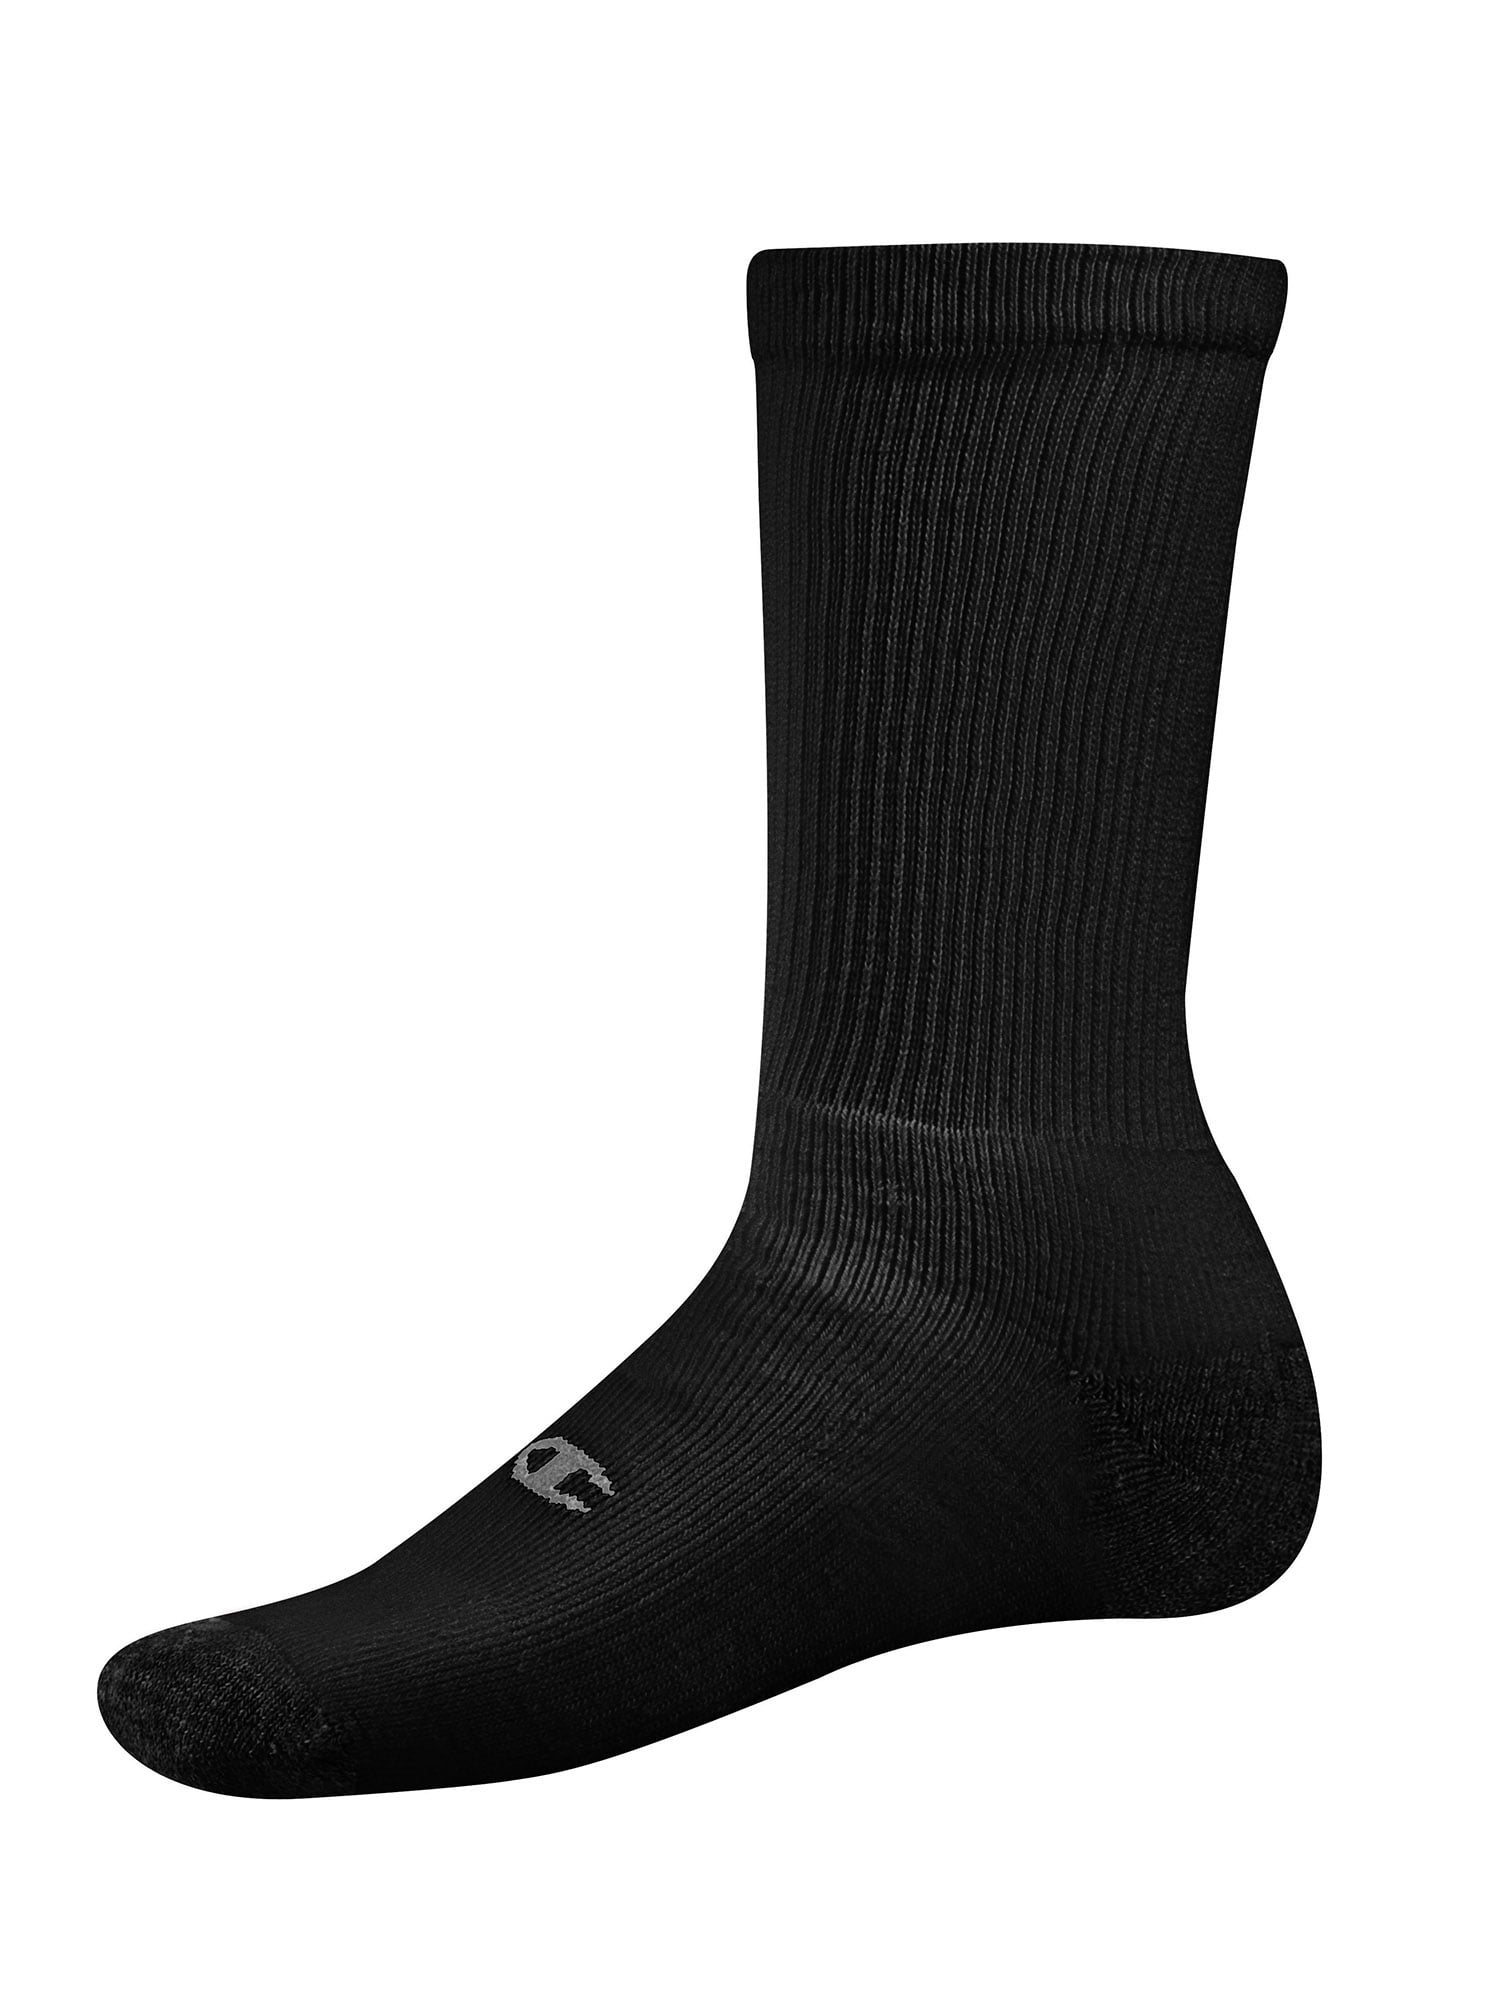 Champion Double Dry® Performance Men's No-Show Socks Extend Size 12-14 NEW!! 